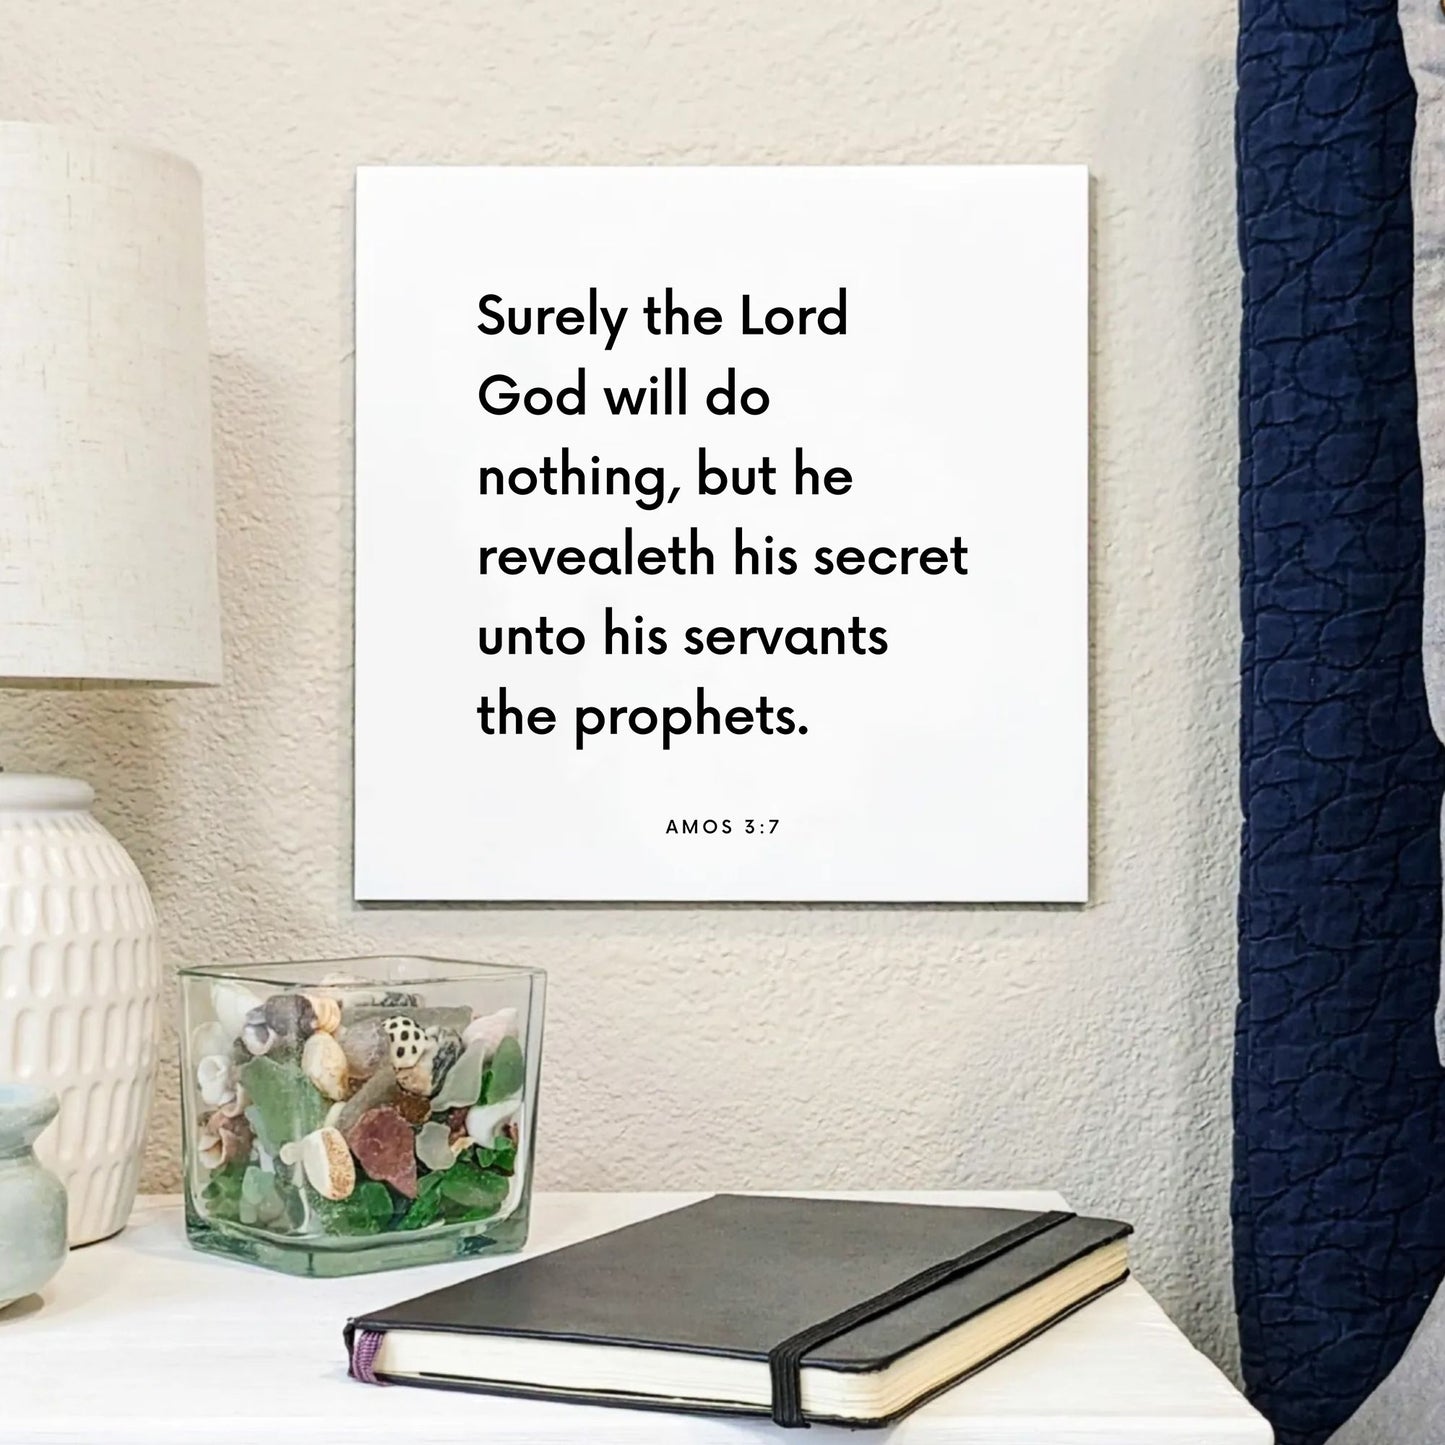 Bedside mouting of the scripture tile for Amos 3:7 - "He revealeth his secret unto his servants the prophets"